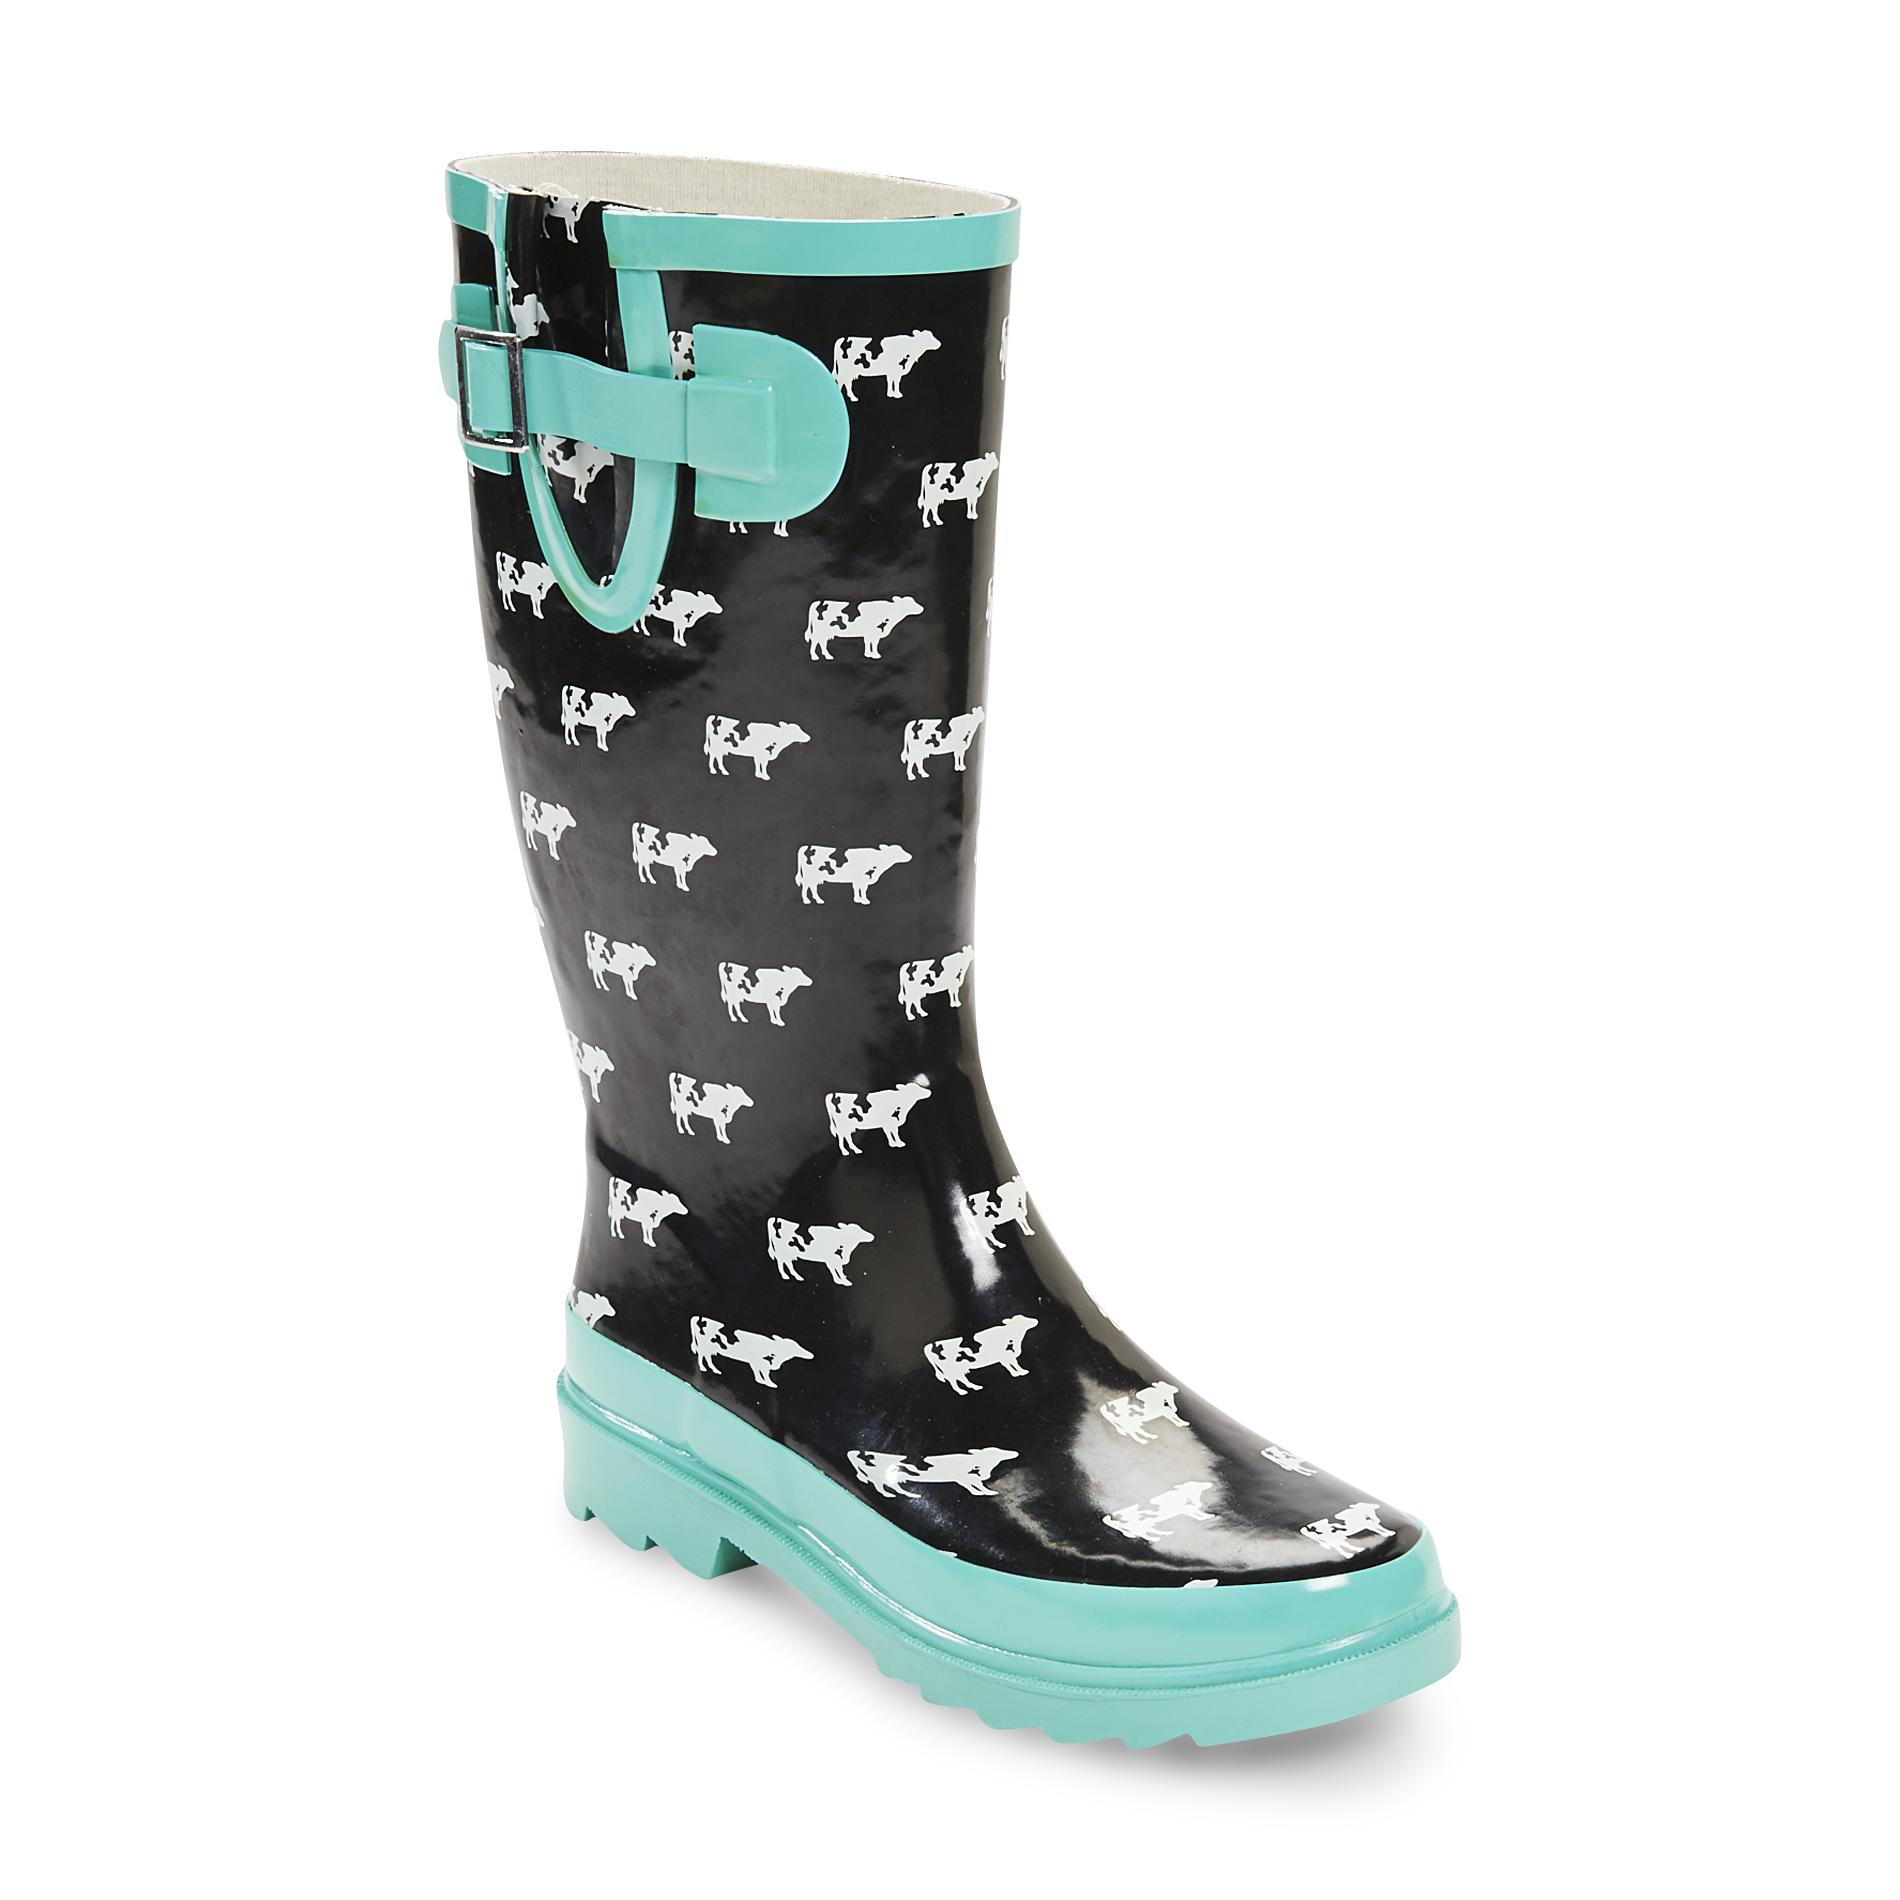 Western Chief Women's Black/White Water-Resistant Pull-On Rain Boot - Cow Crossing